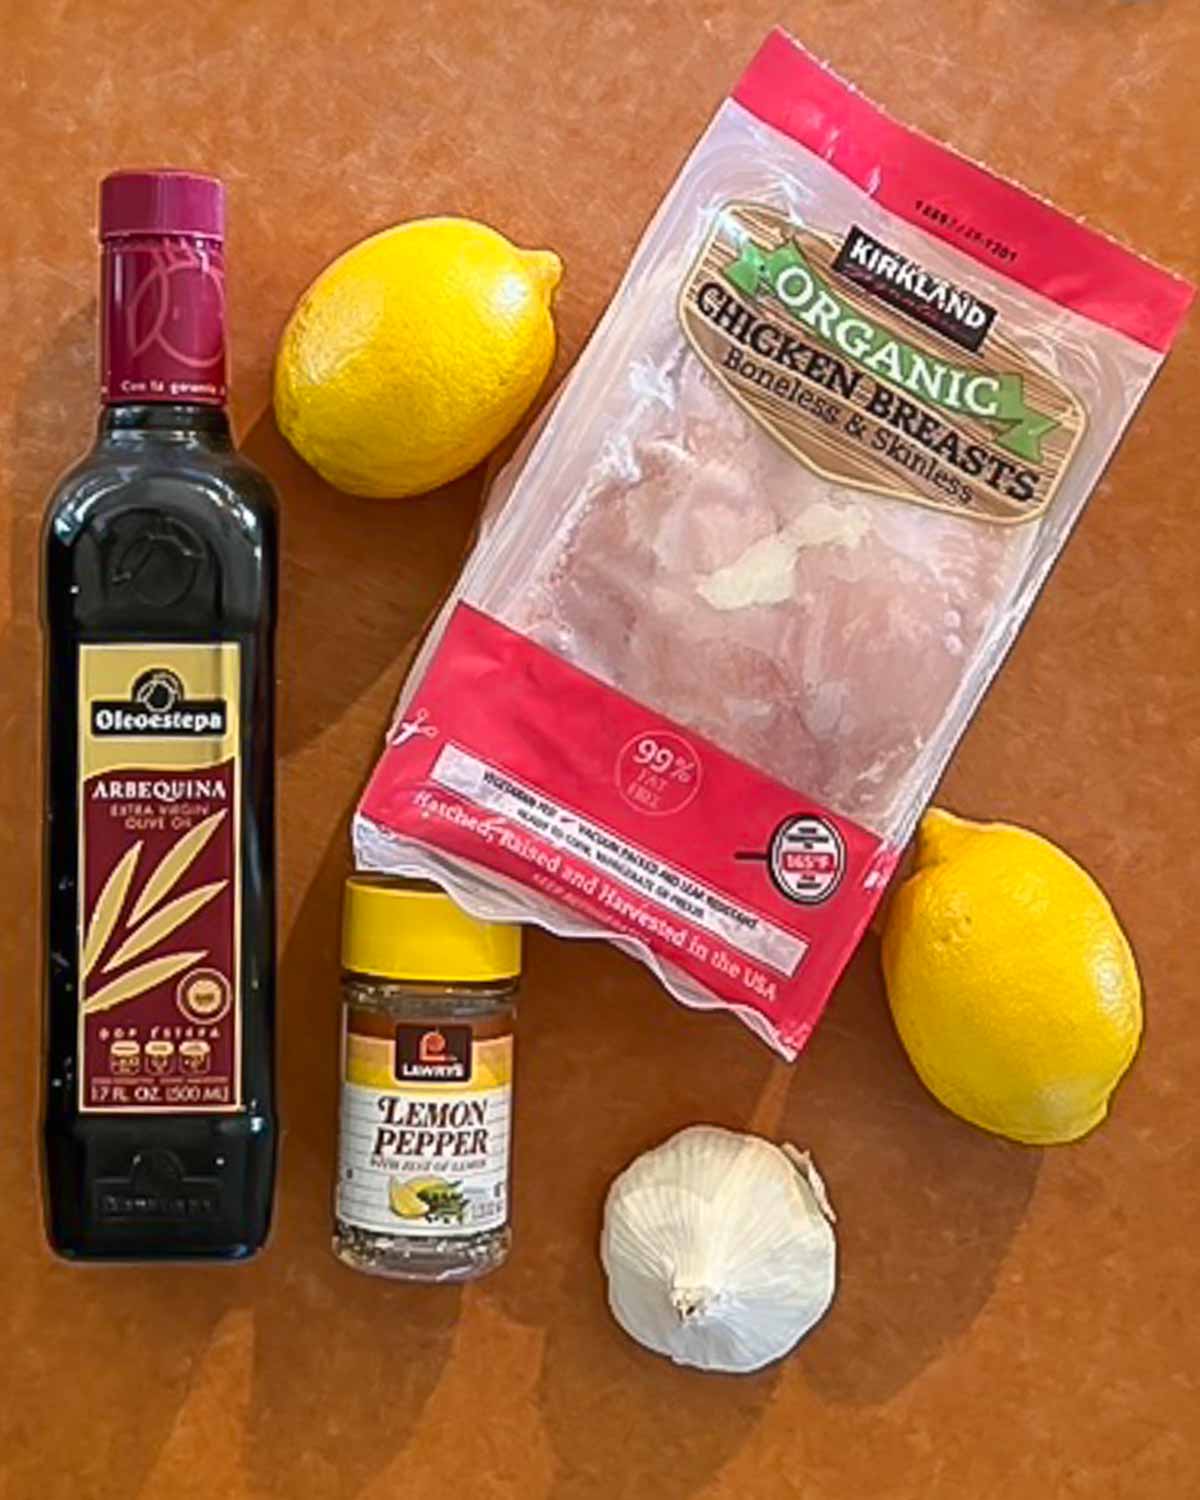 Overshot of the ingredients needed to make Grilled Lemon Pepper Chicken